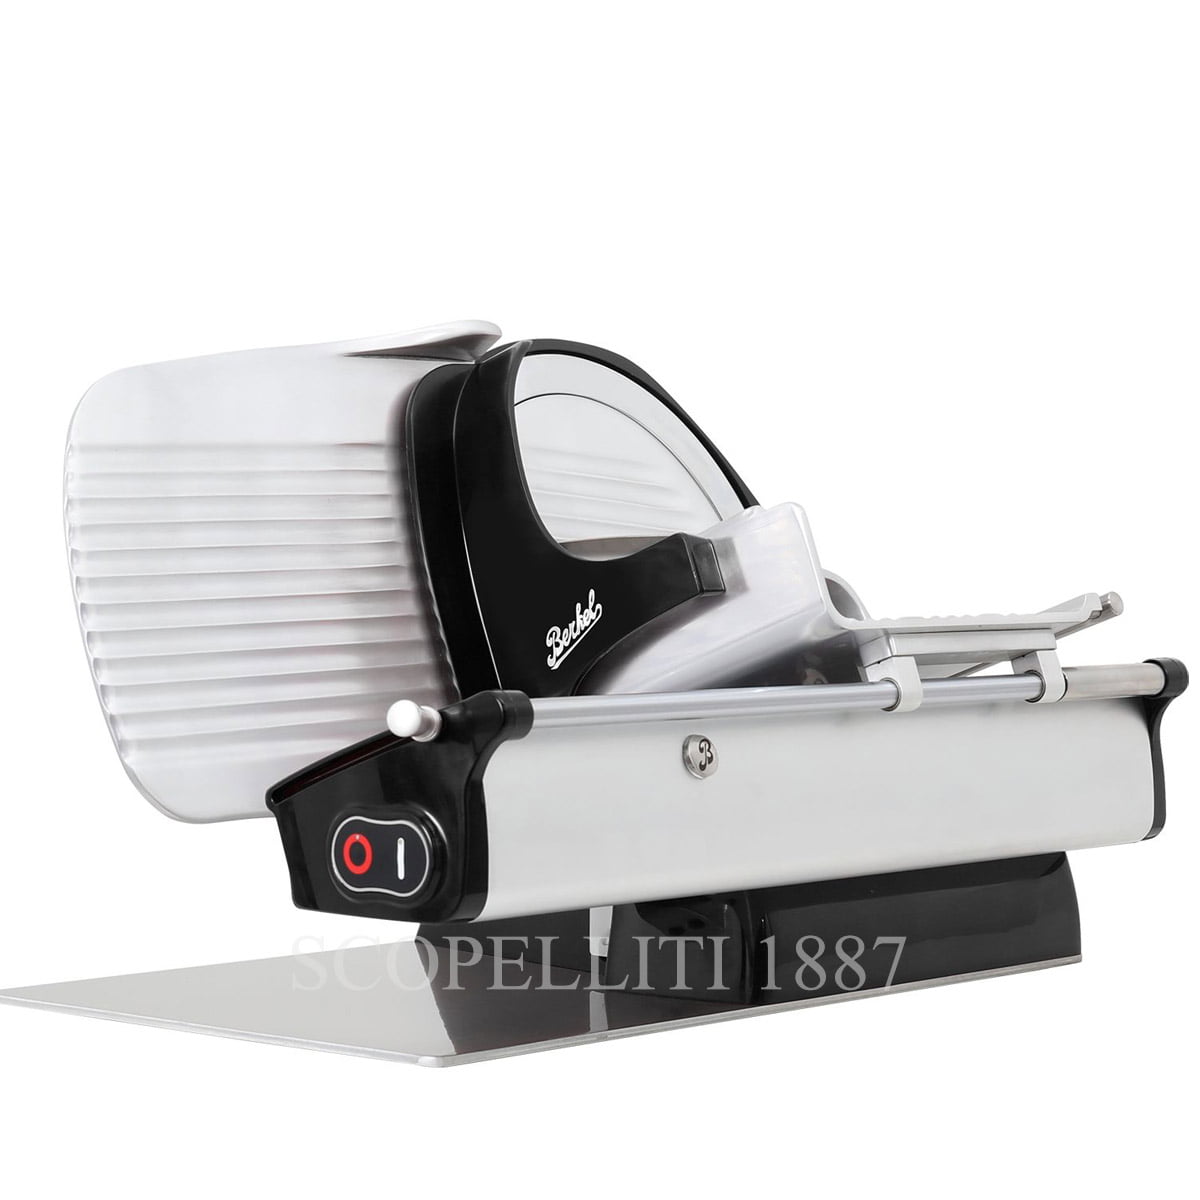 Berkel Tribute Meat Slicer Black with Stand - Luxury Gift for Home